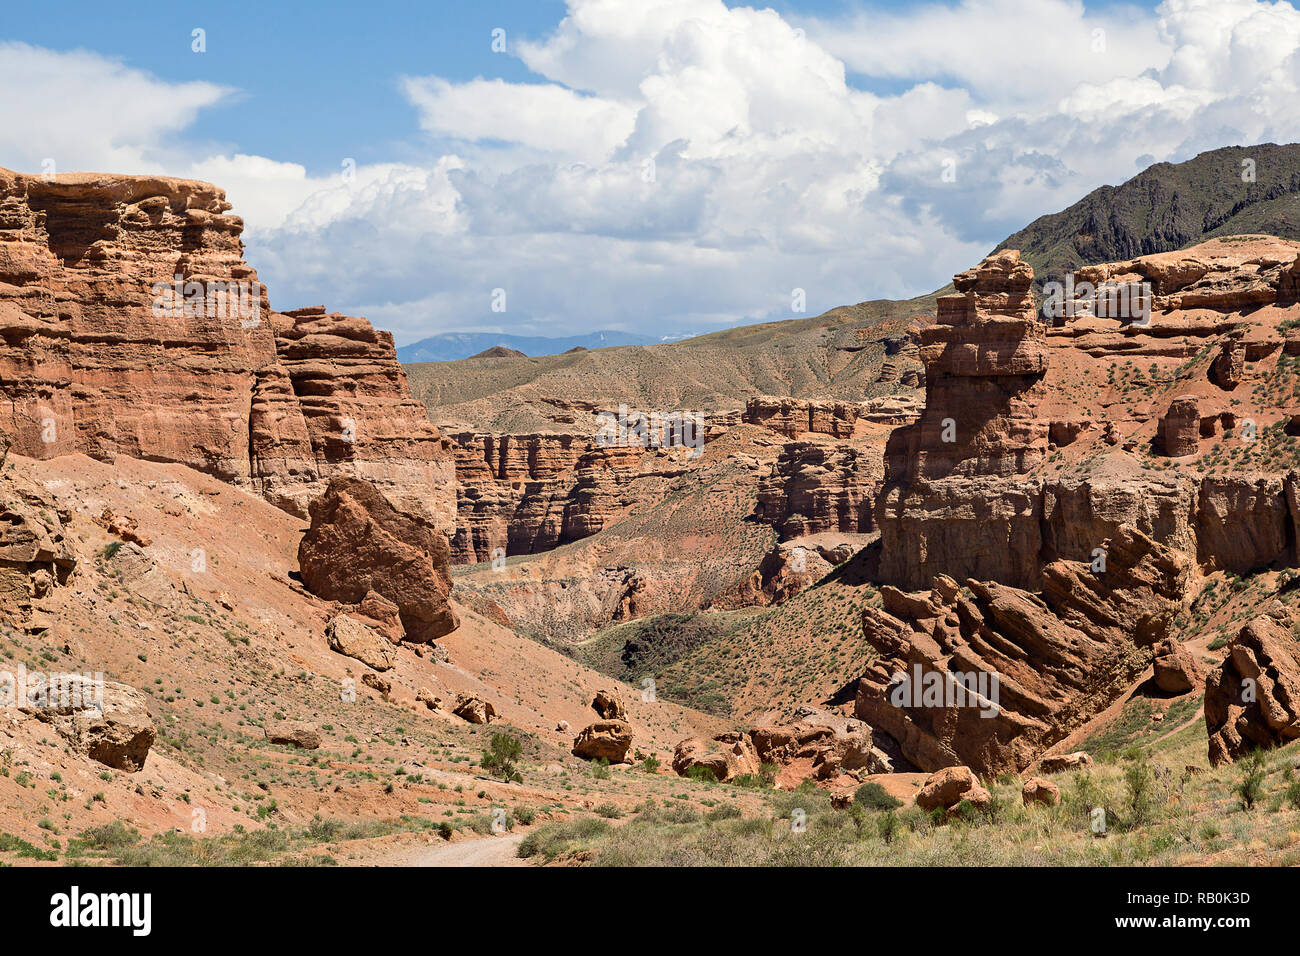 Charyn Canyon in Kazakhstan known for its interesting rock formations. Stock Photo